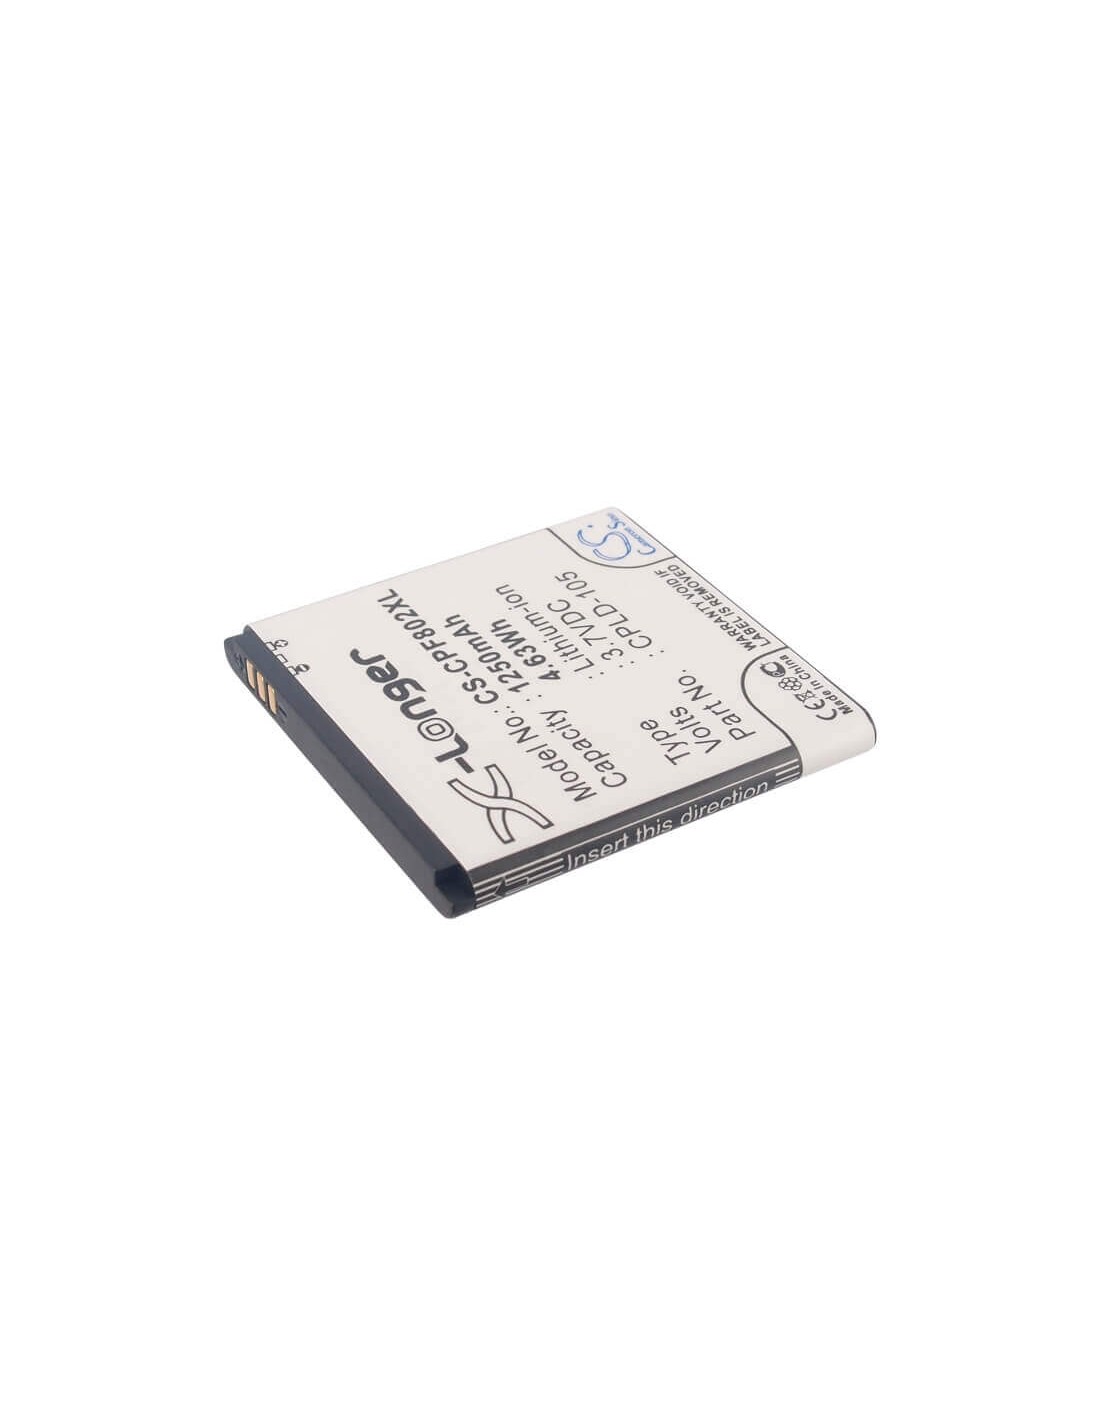 Battery for Coolpad 8020+ 3.7V, 1250mAh - 4.63Wh